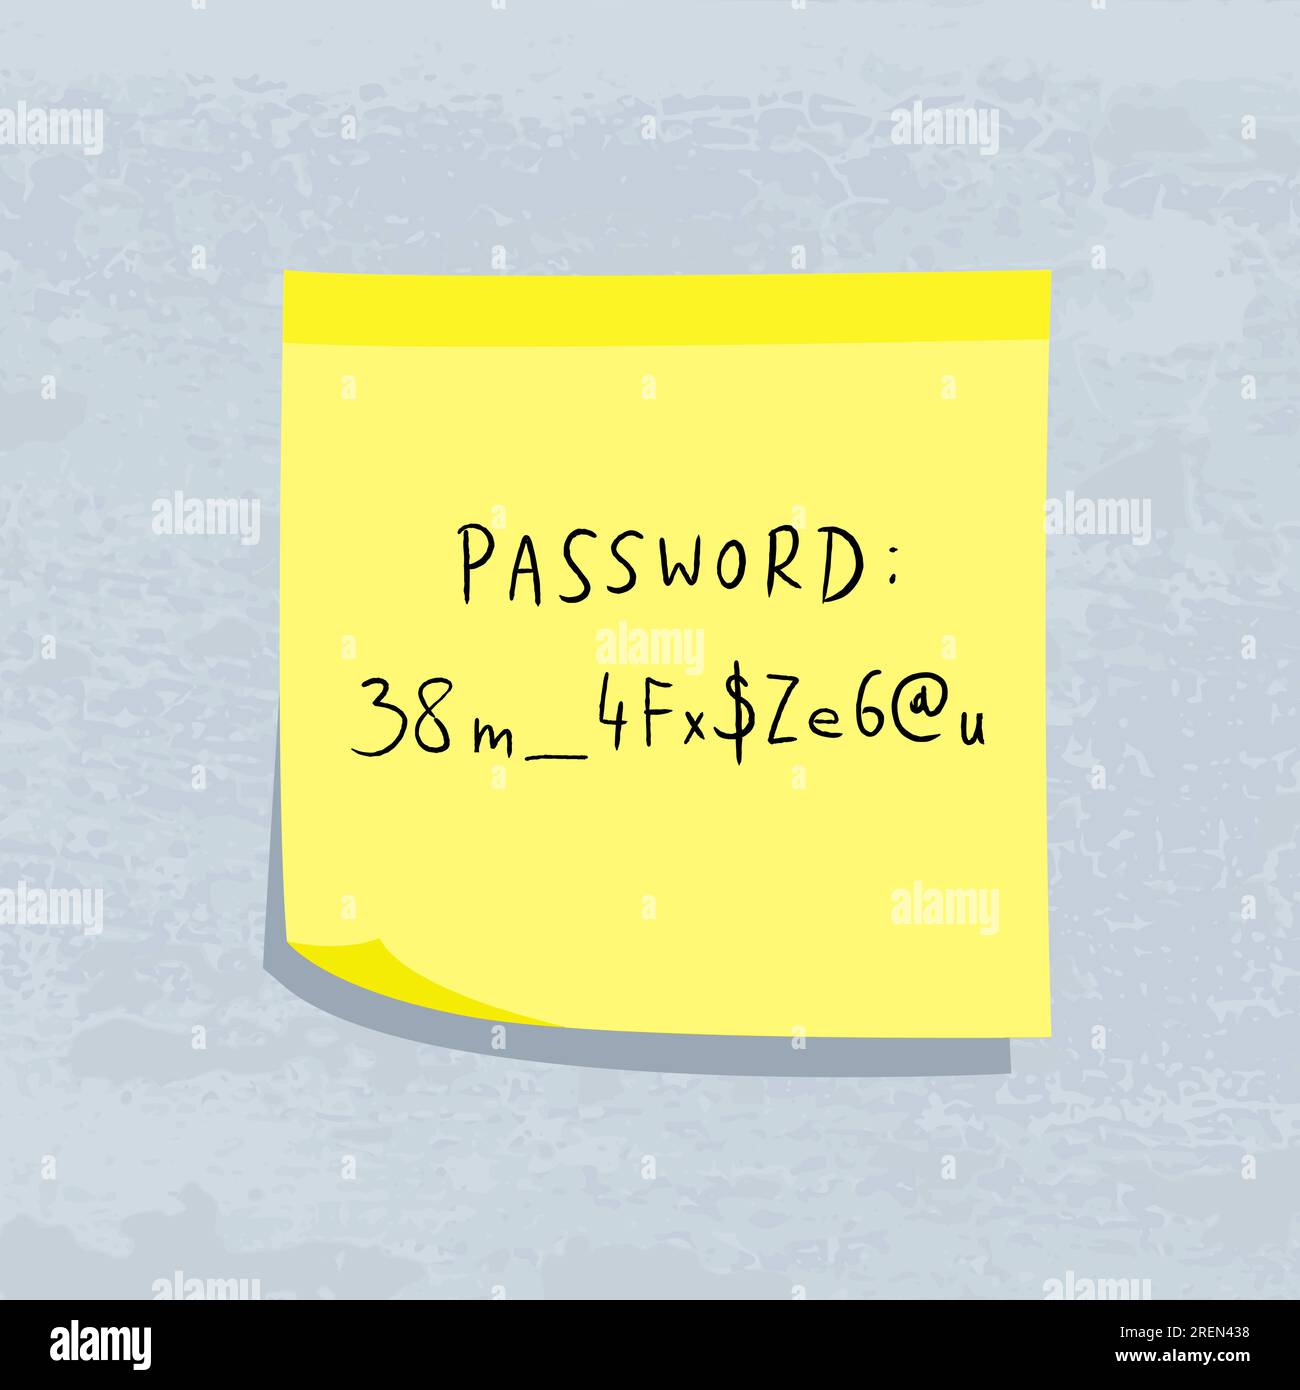 Difficult password with special characters. Yellow sticky note message. Paper sign. Stock Vector